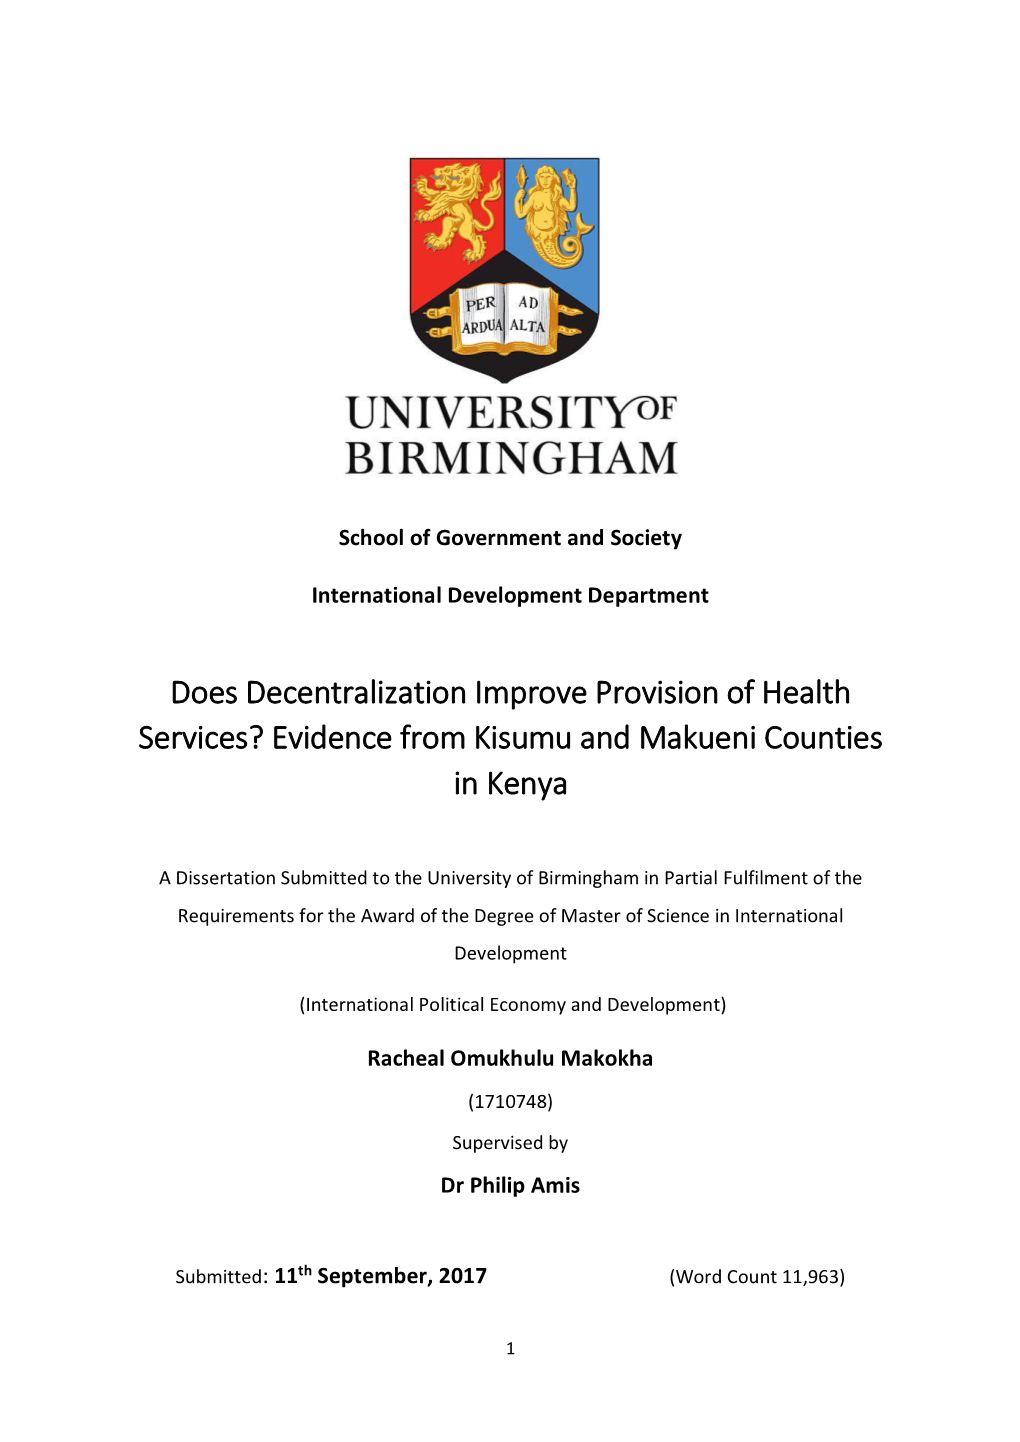 Does Decentralization Improve Provision of Health Services? Evidence from Kisumu and Makueni Counties in Kenya